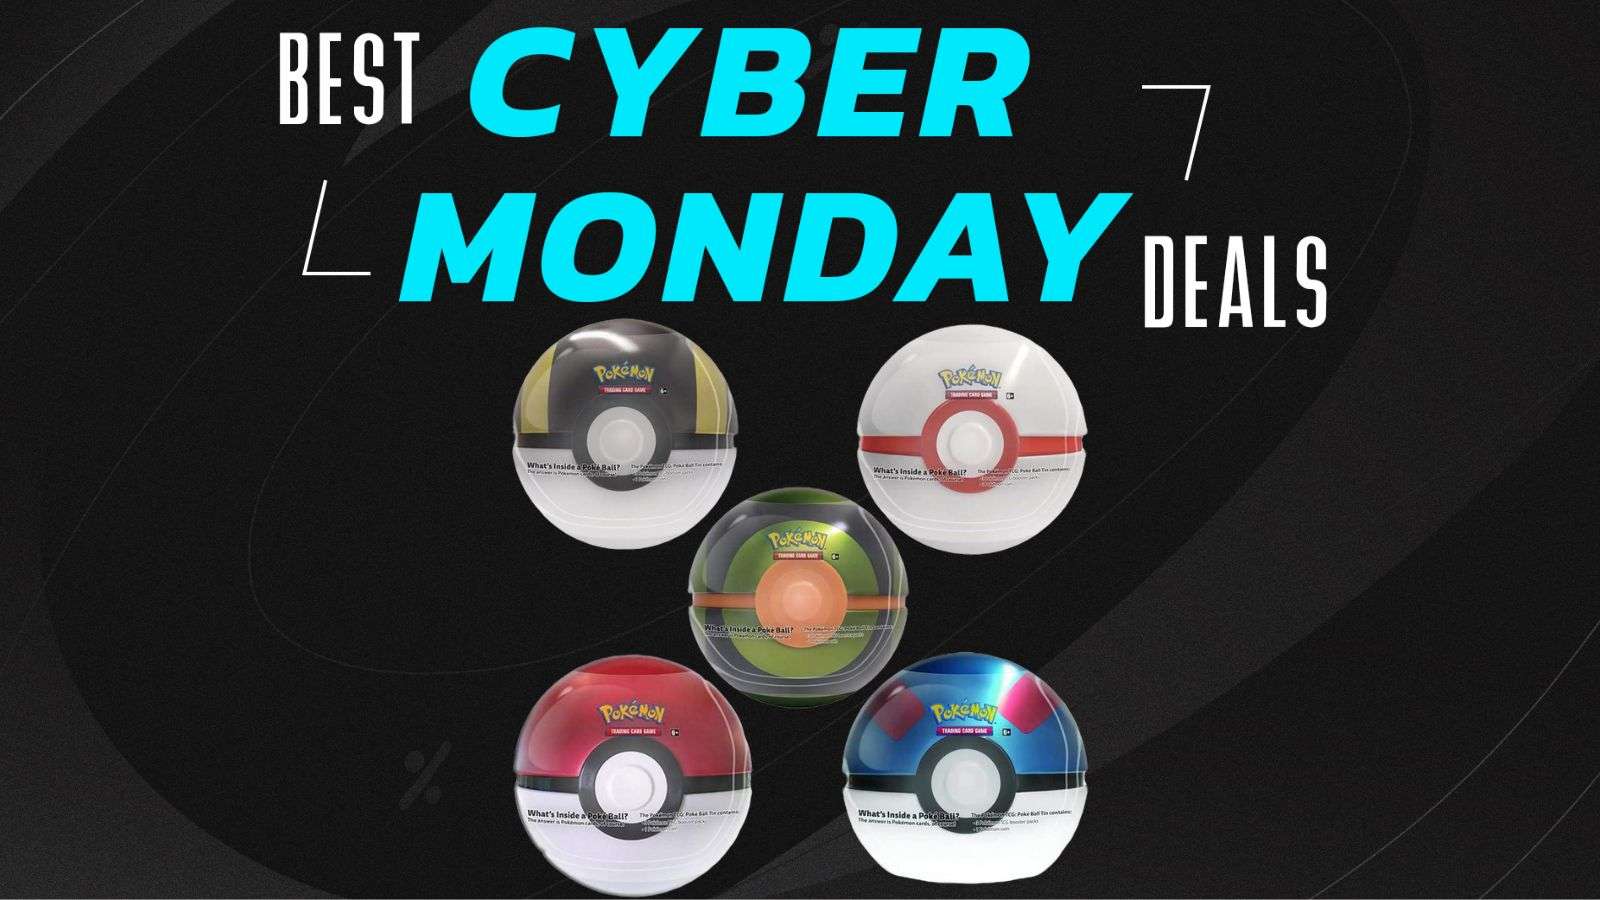 Best Cyber Monday Deals logo, underneath are Pokemon TCG Q1, Q2, Q3, and Q4 Pokeball tins with different designs.